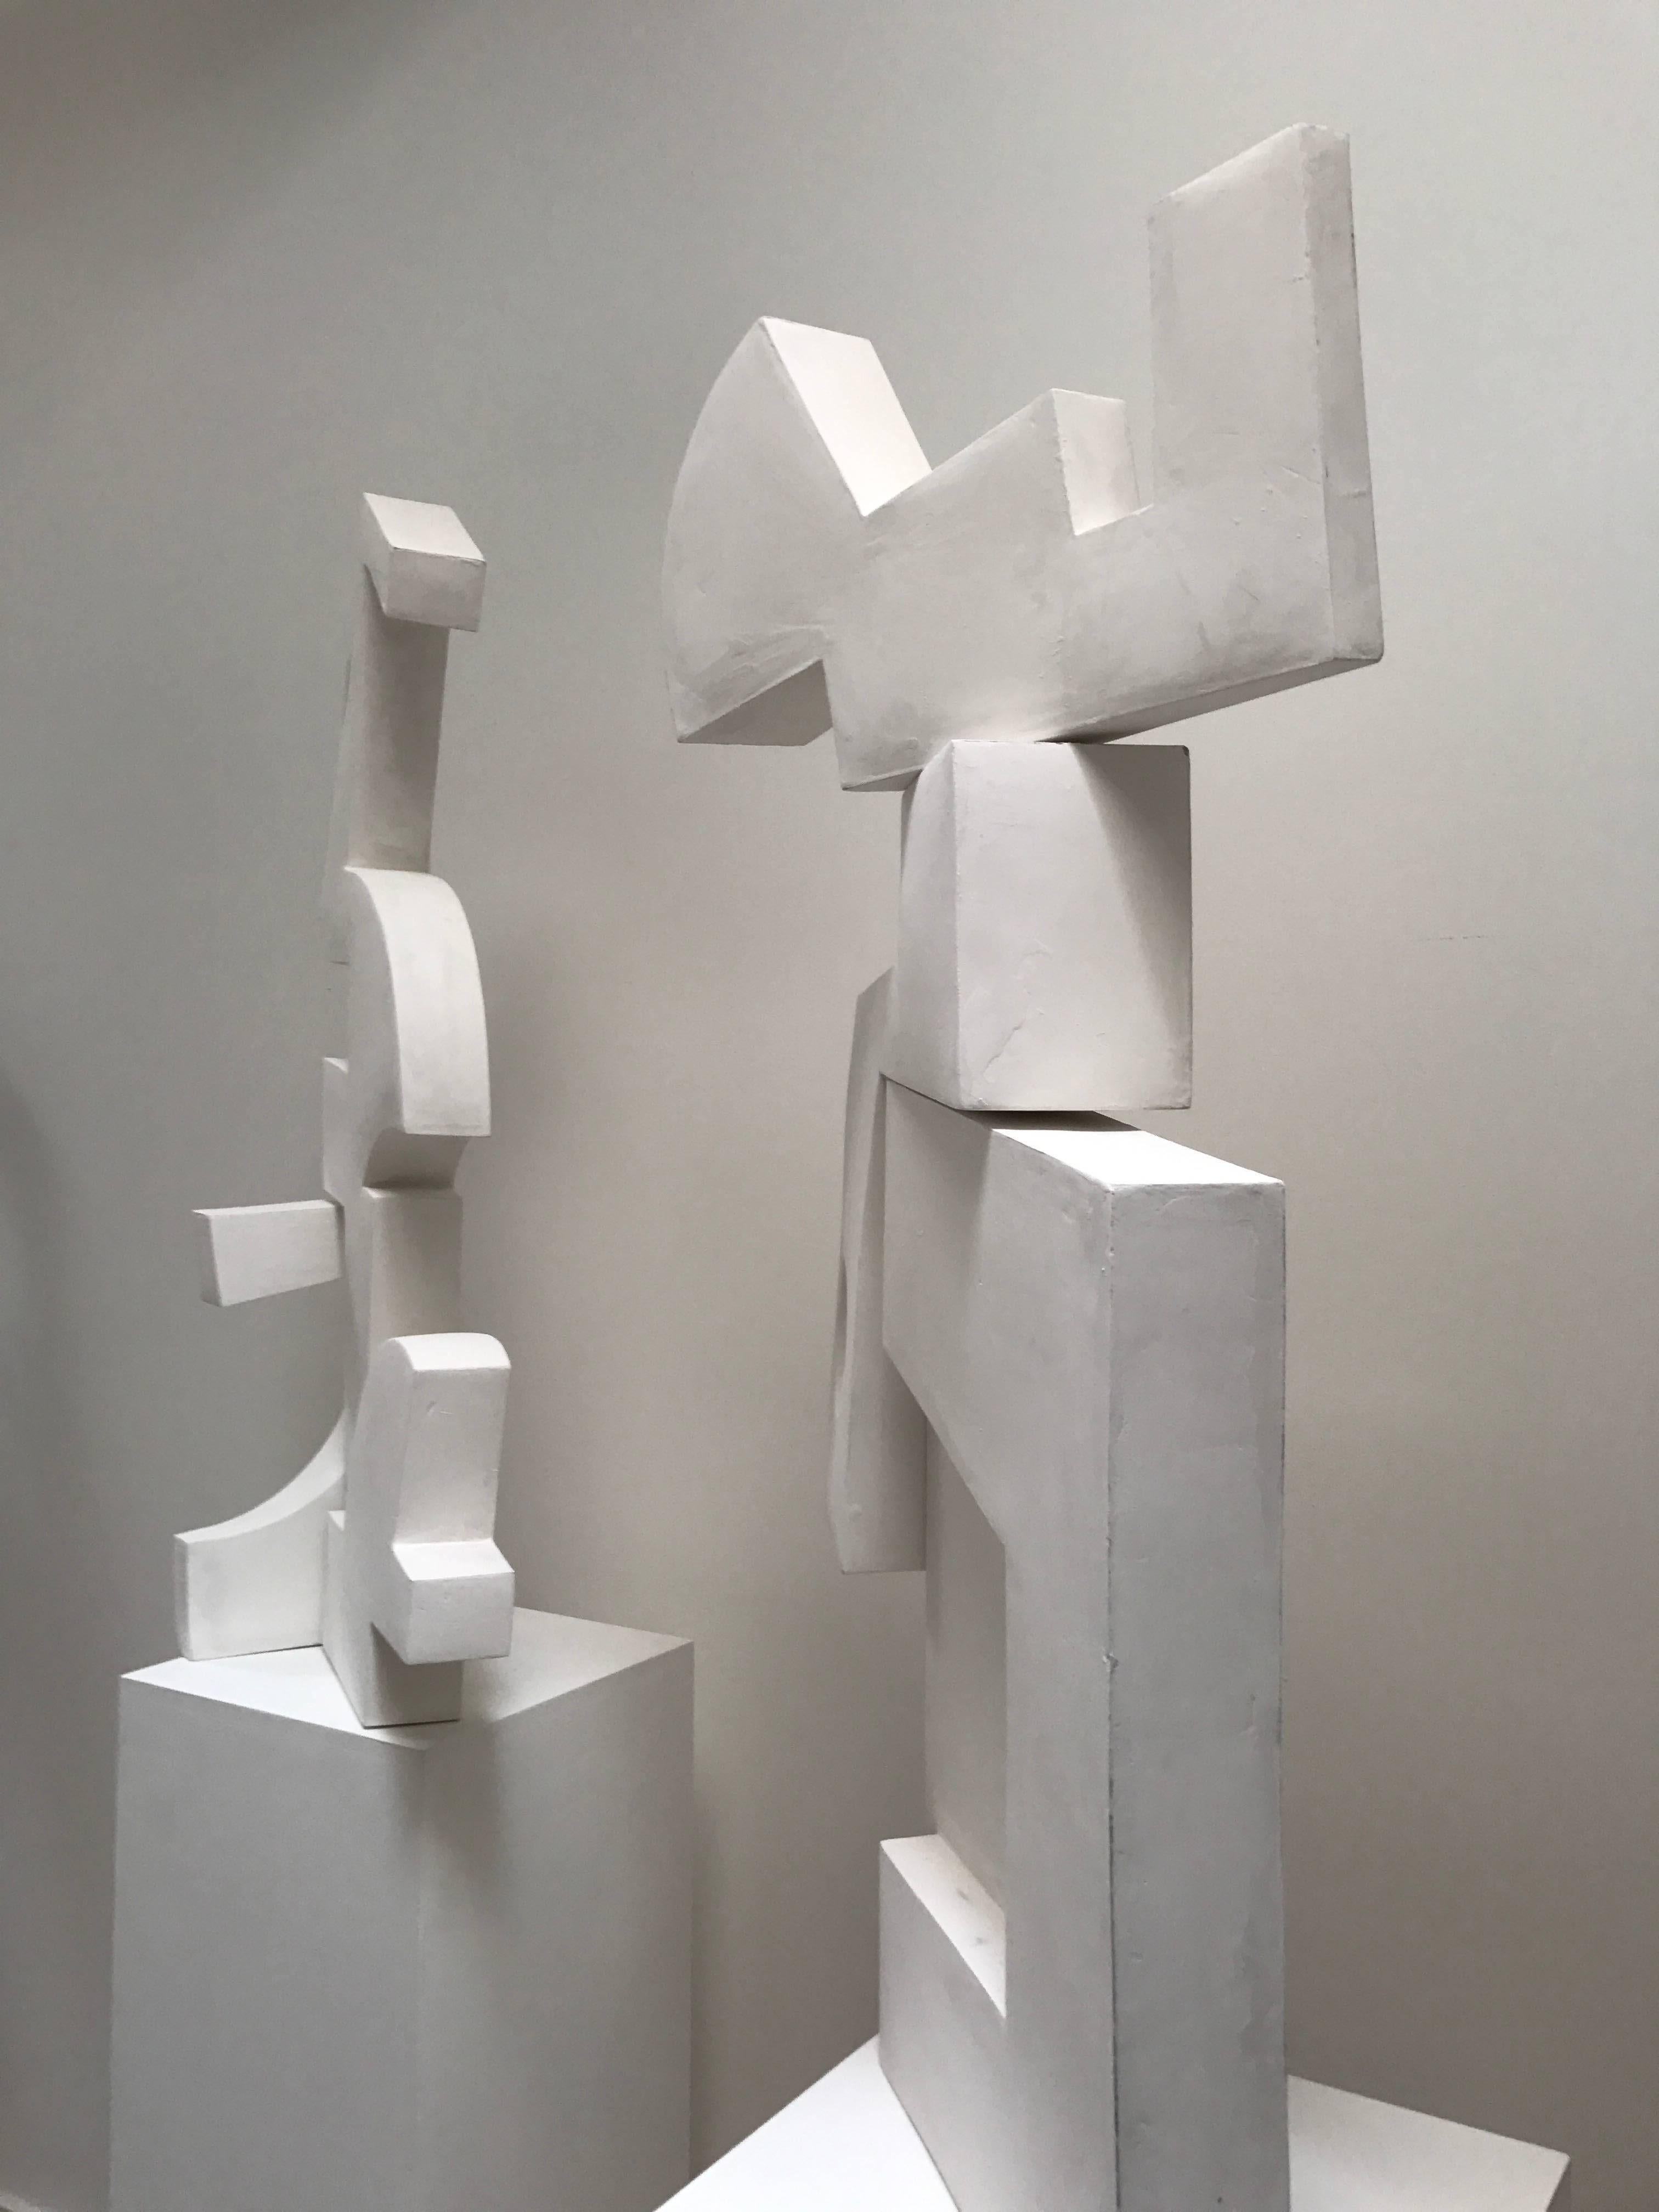 These pair of sculpture is part of the new portfolio of the talented Gareth Devonald Smith, artist and designer based in London, which involves large constructed blocks fitted together to form more integrated structures.
They have a personality